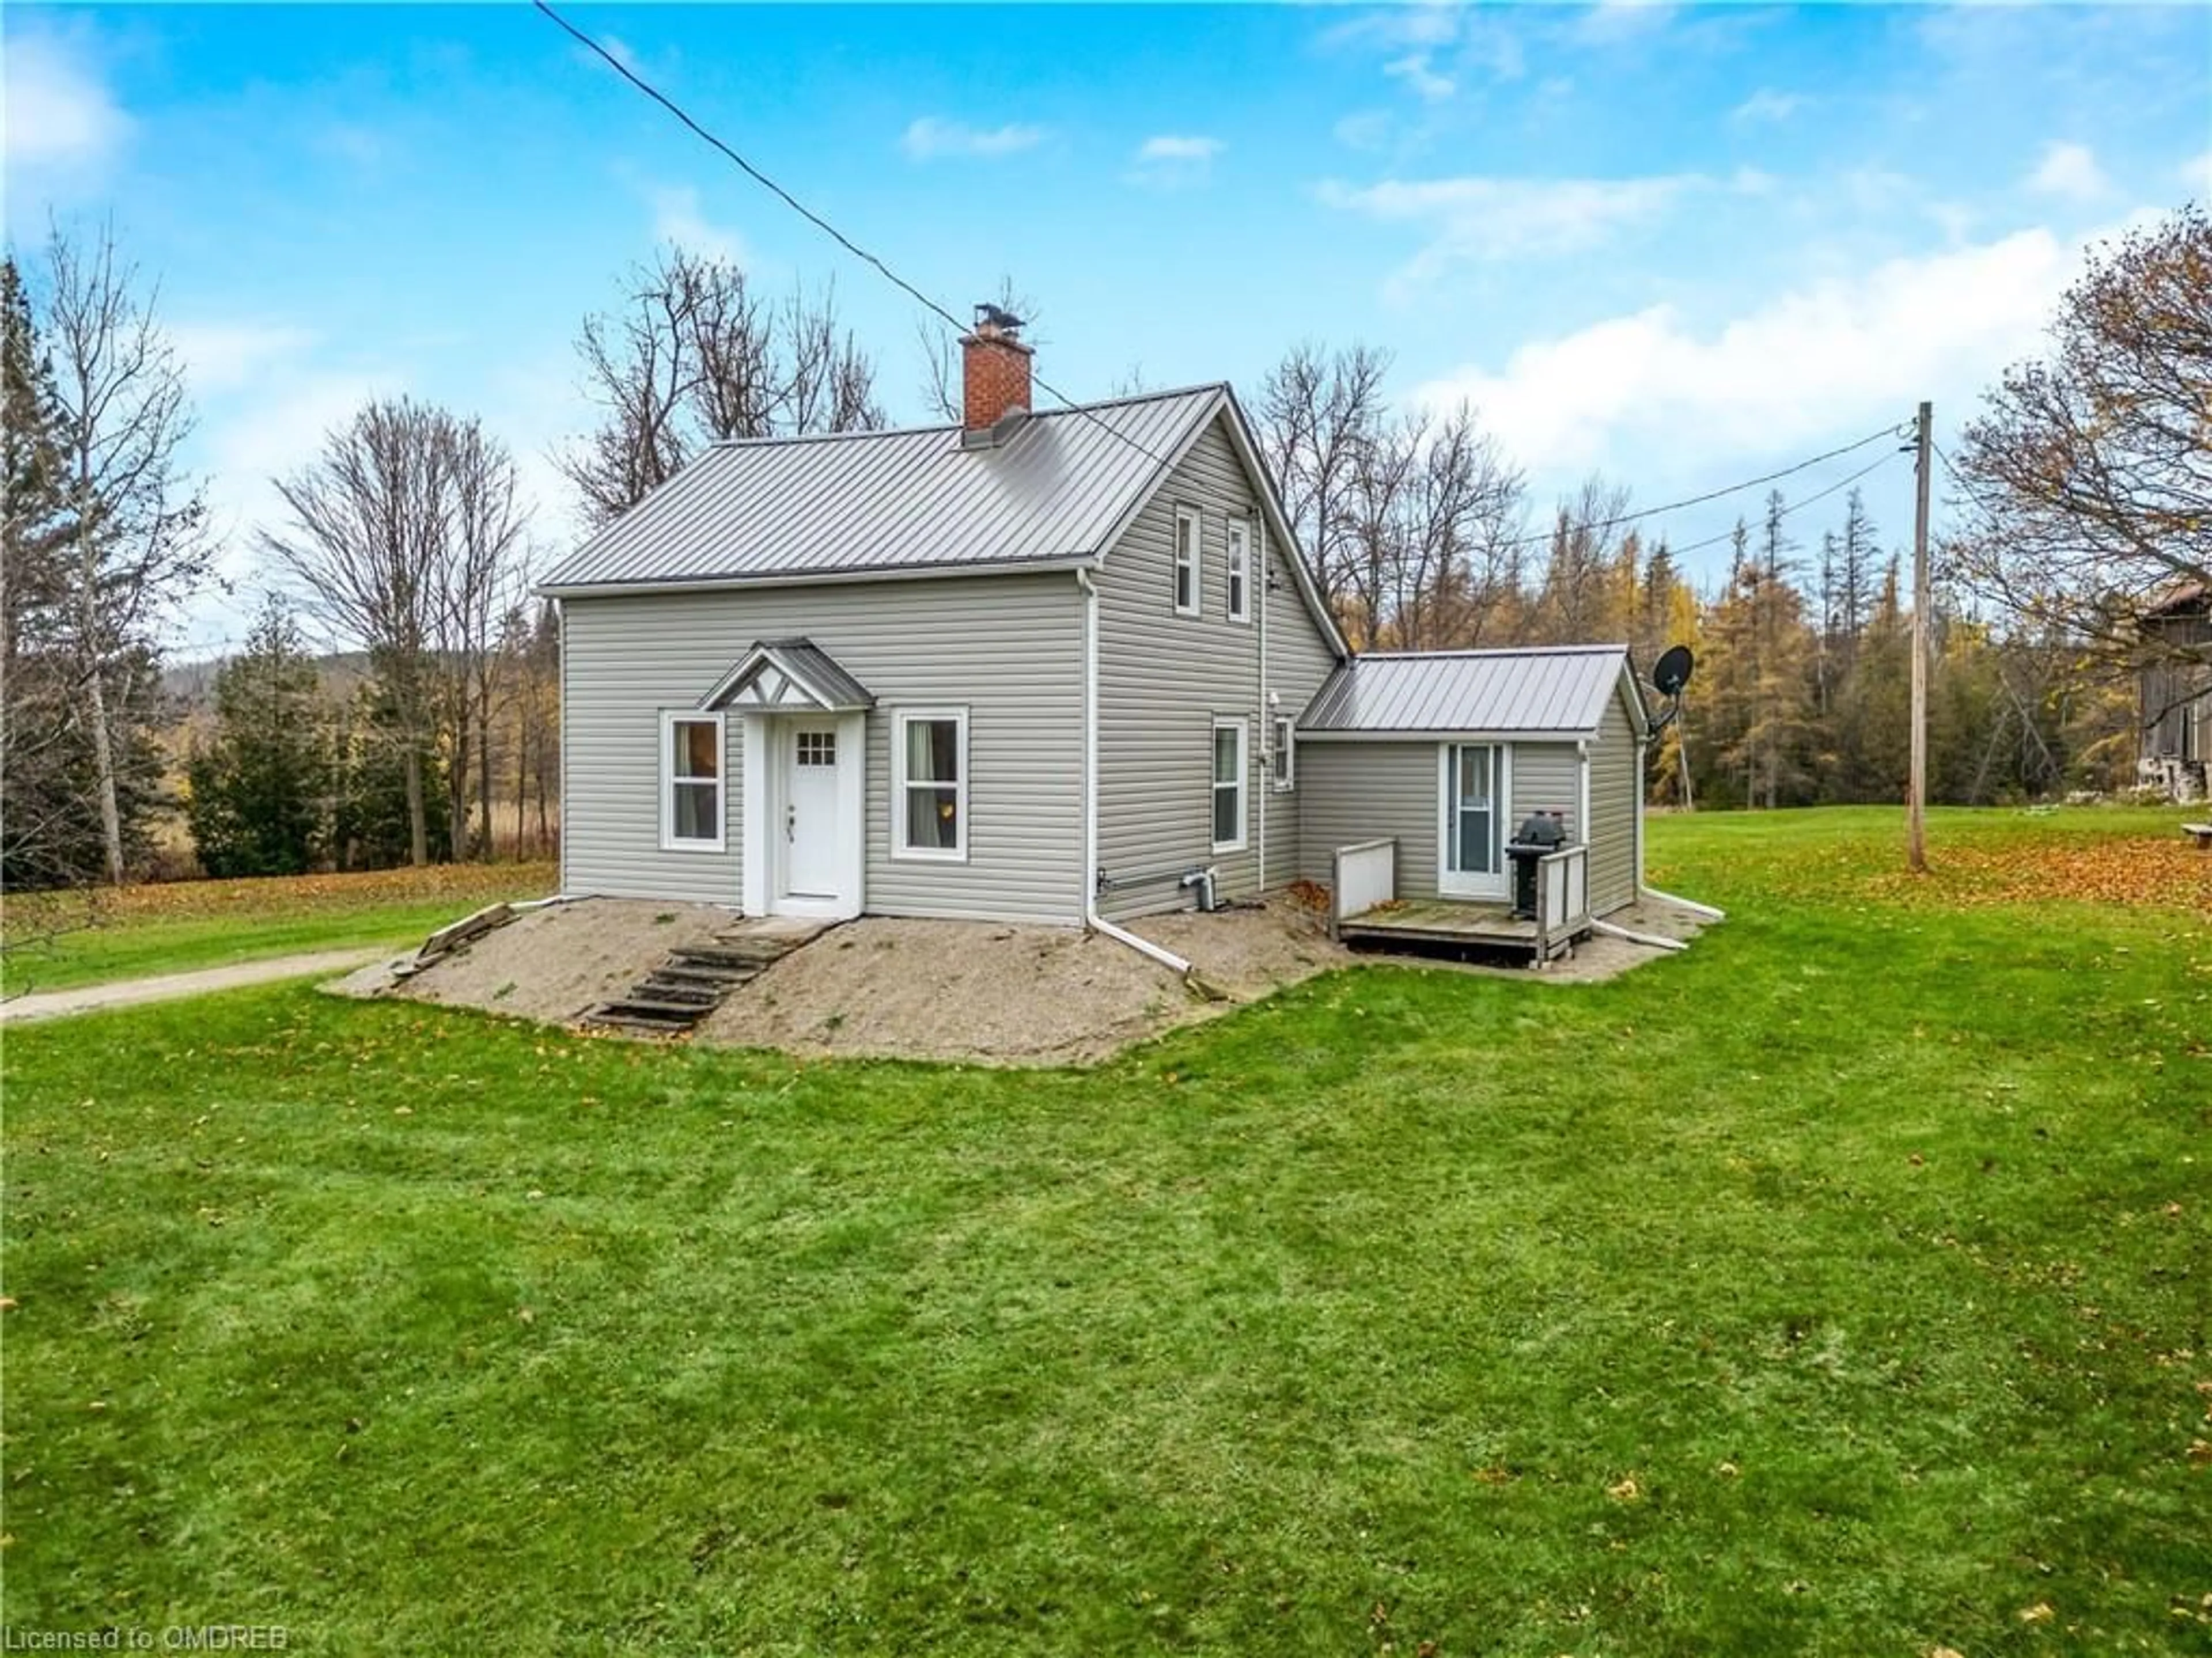 Frontside or backside of a home for 21346 Shaws Creek Rd, Caledon Ontario L7K 1K8